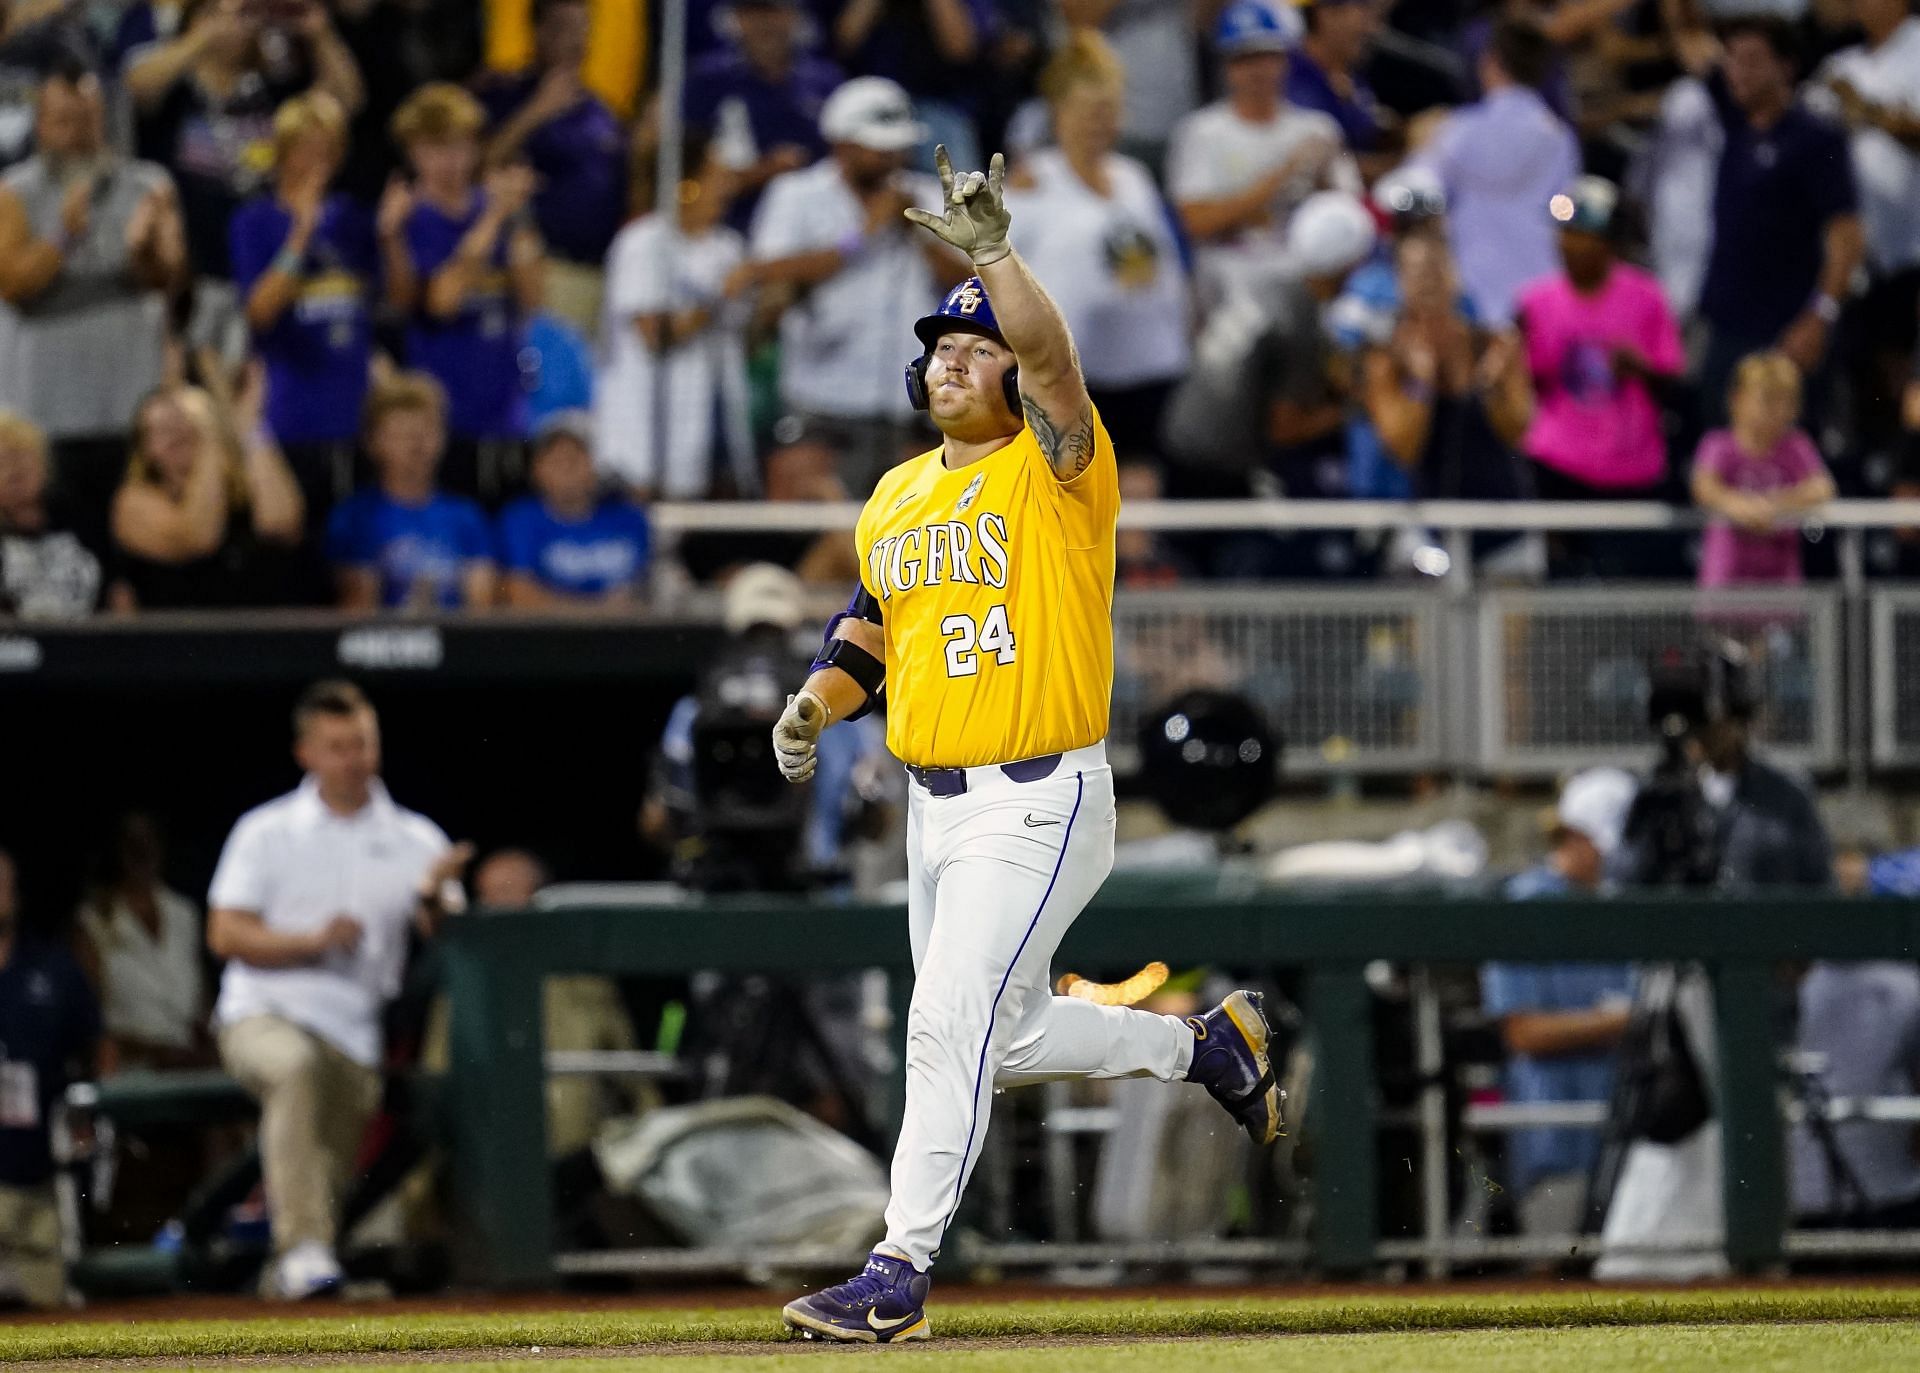 How to watch LSU vs. Florida Game 2 College World Series Finals